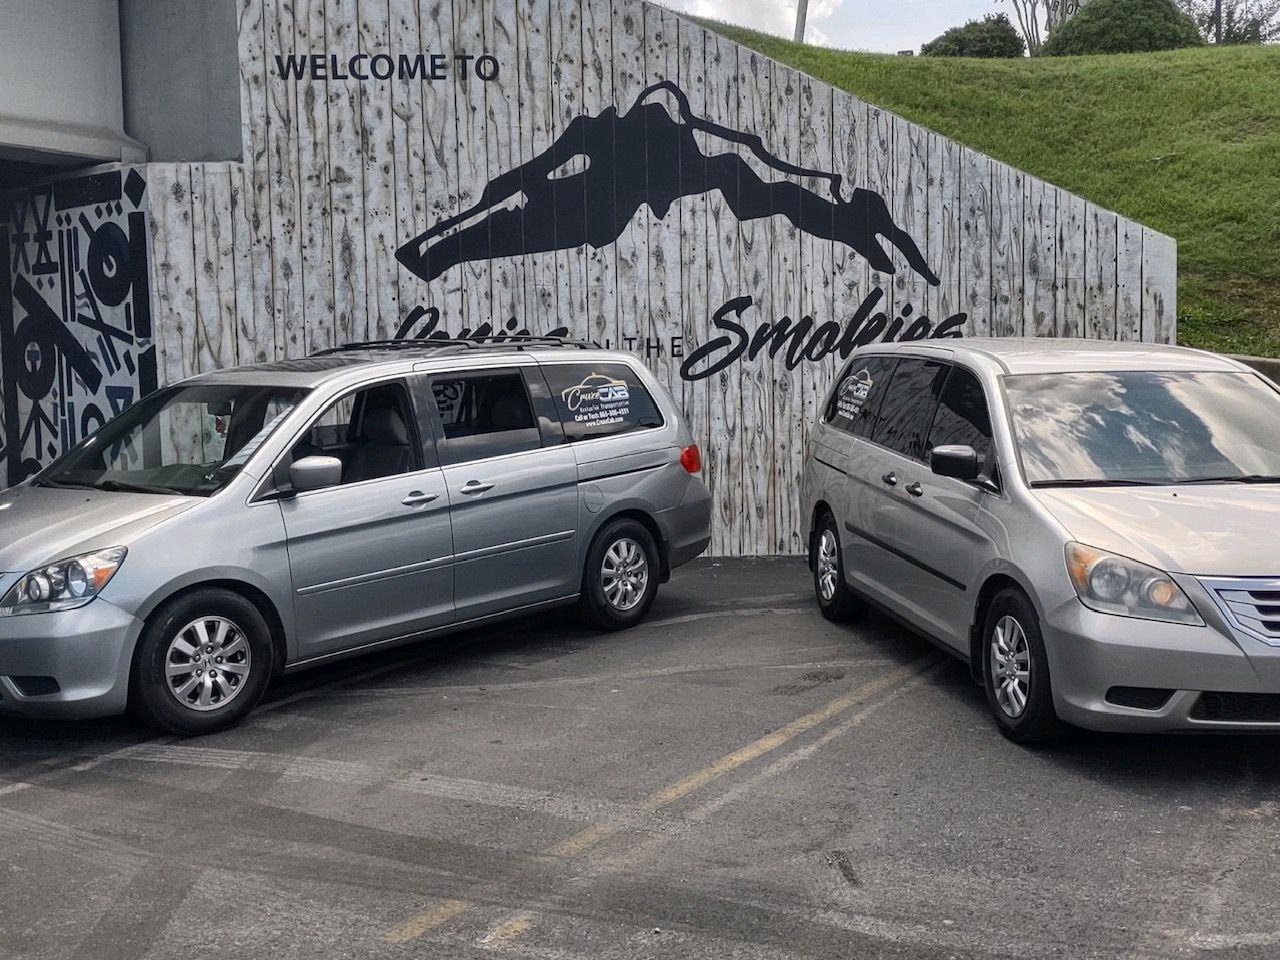 two silver minivans are parked in a parking lot in front of a welcome sign .